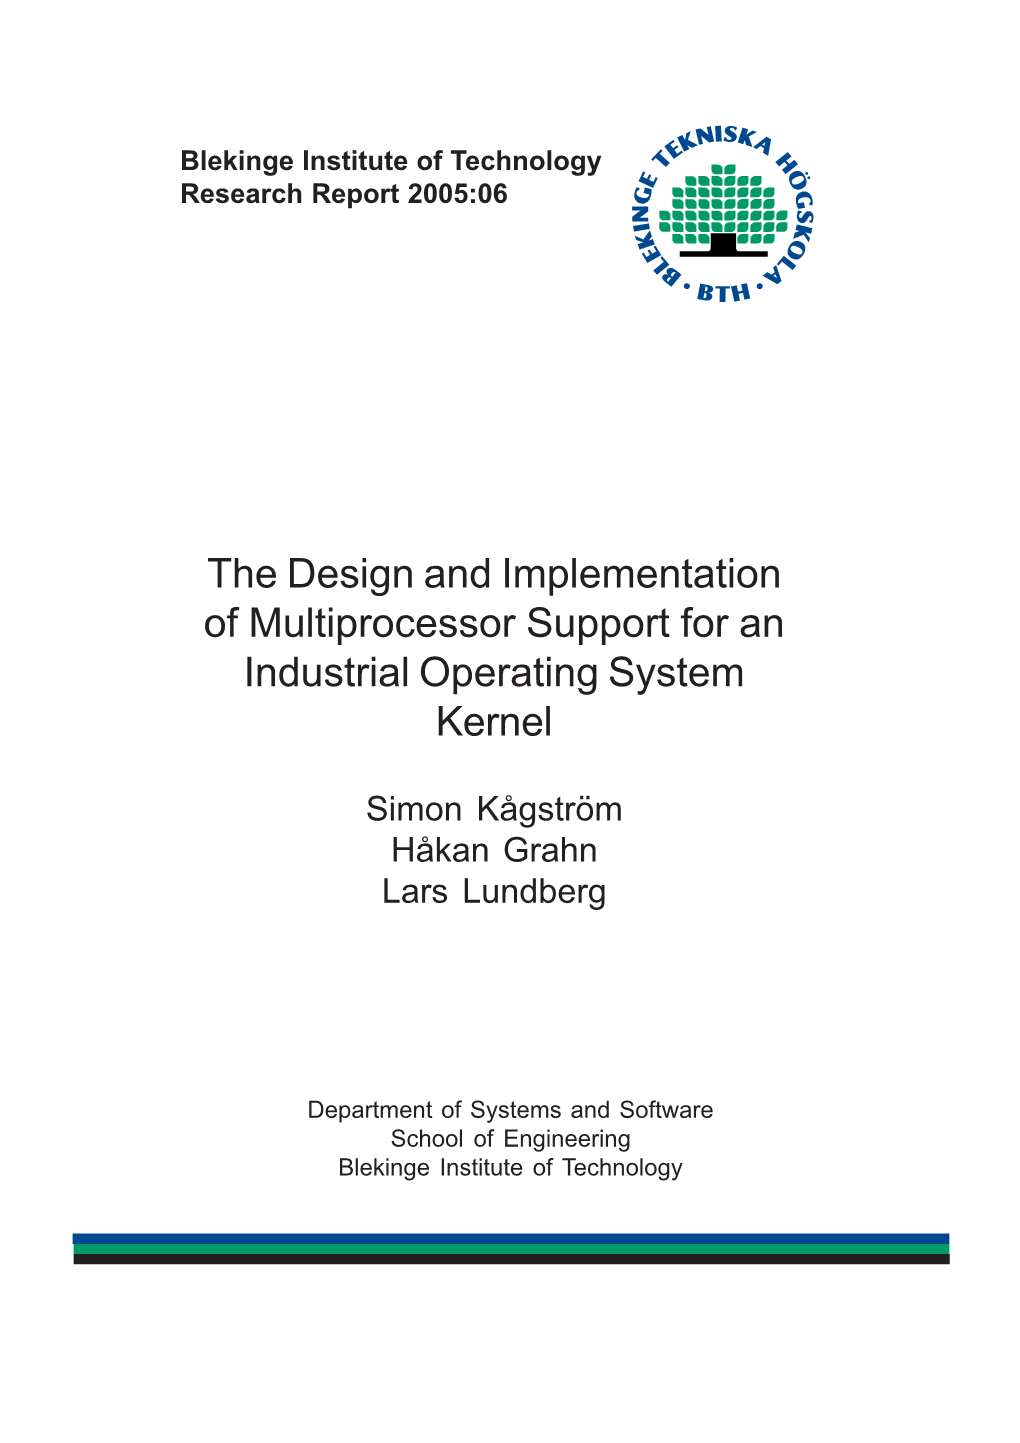 The Design and Implementation of Multiprocessor Support for an Industrial Operating System Kernel